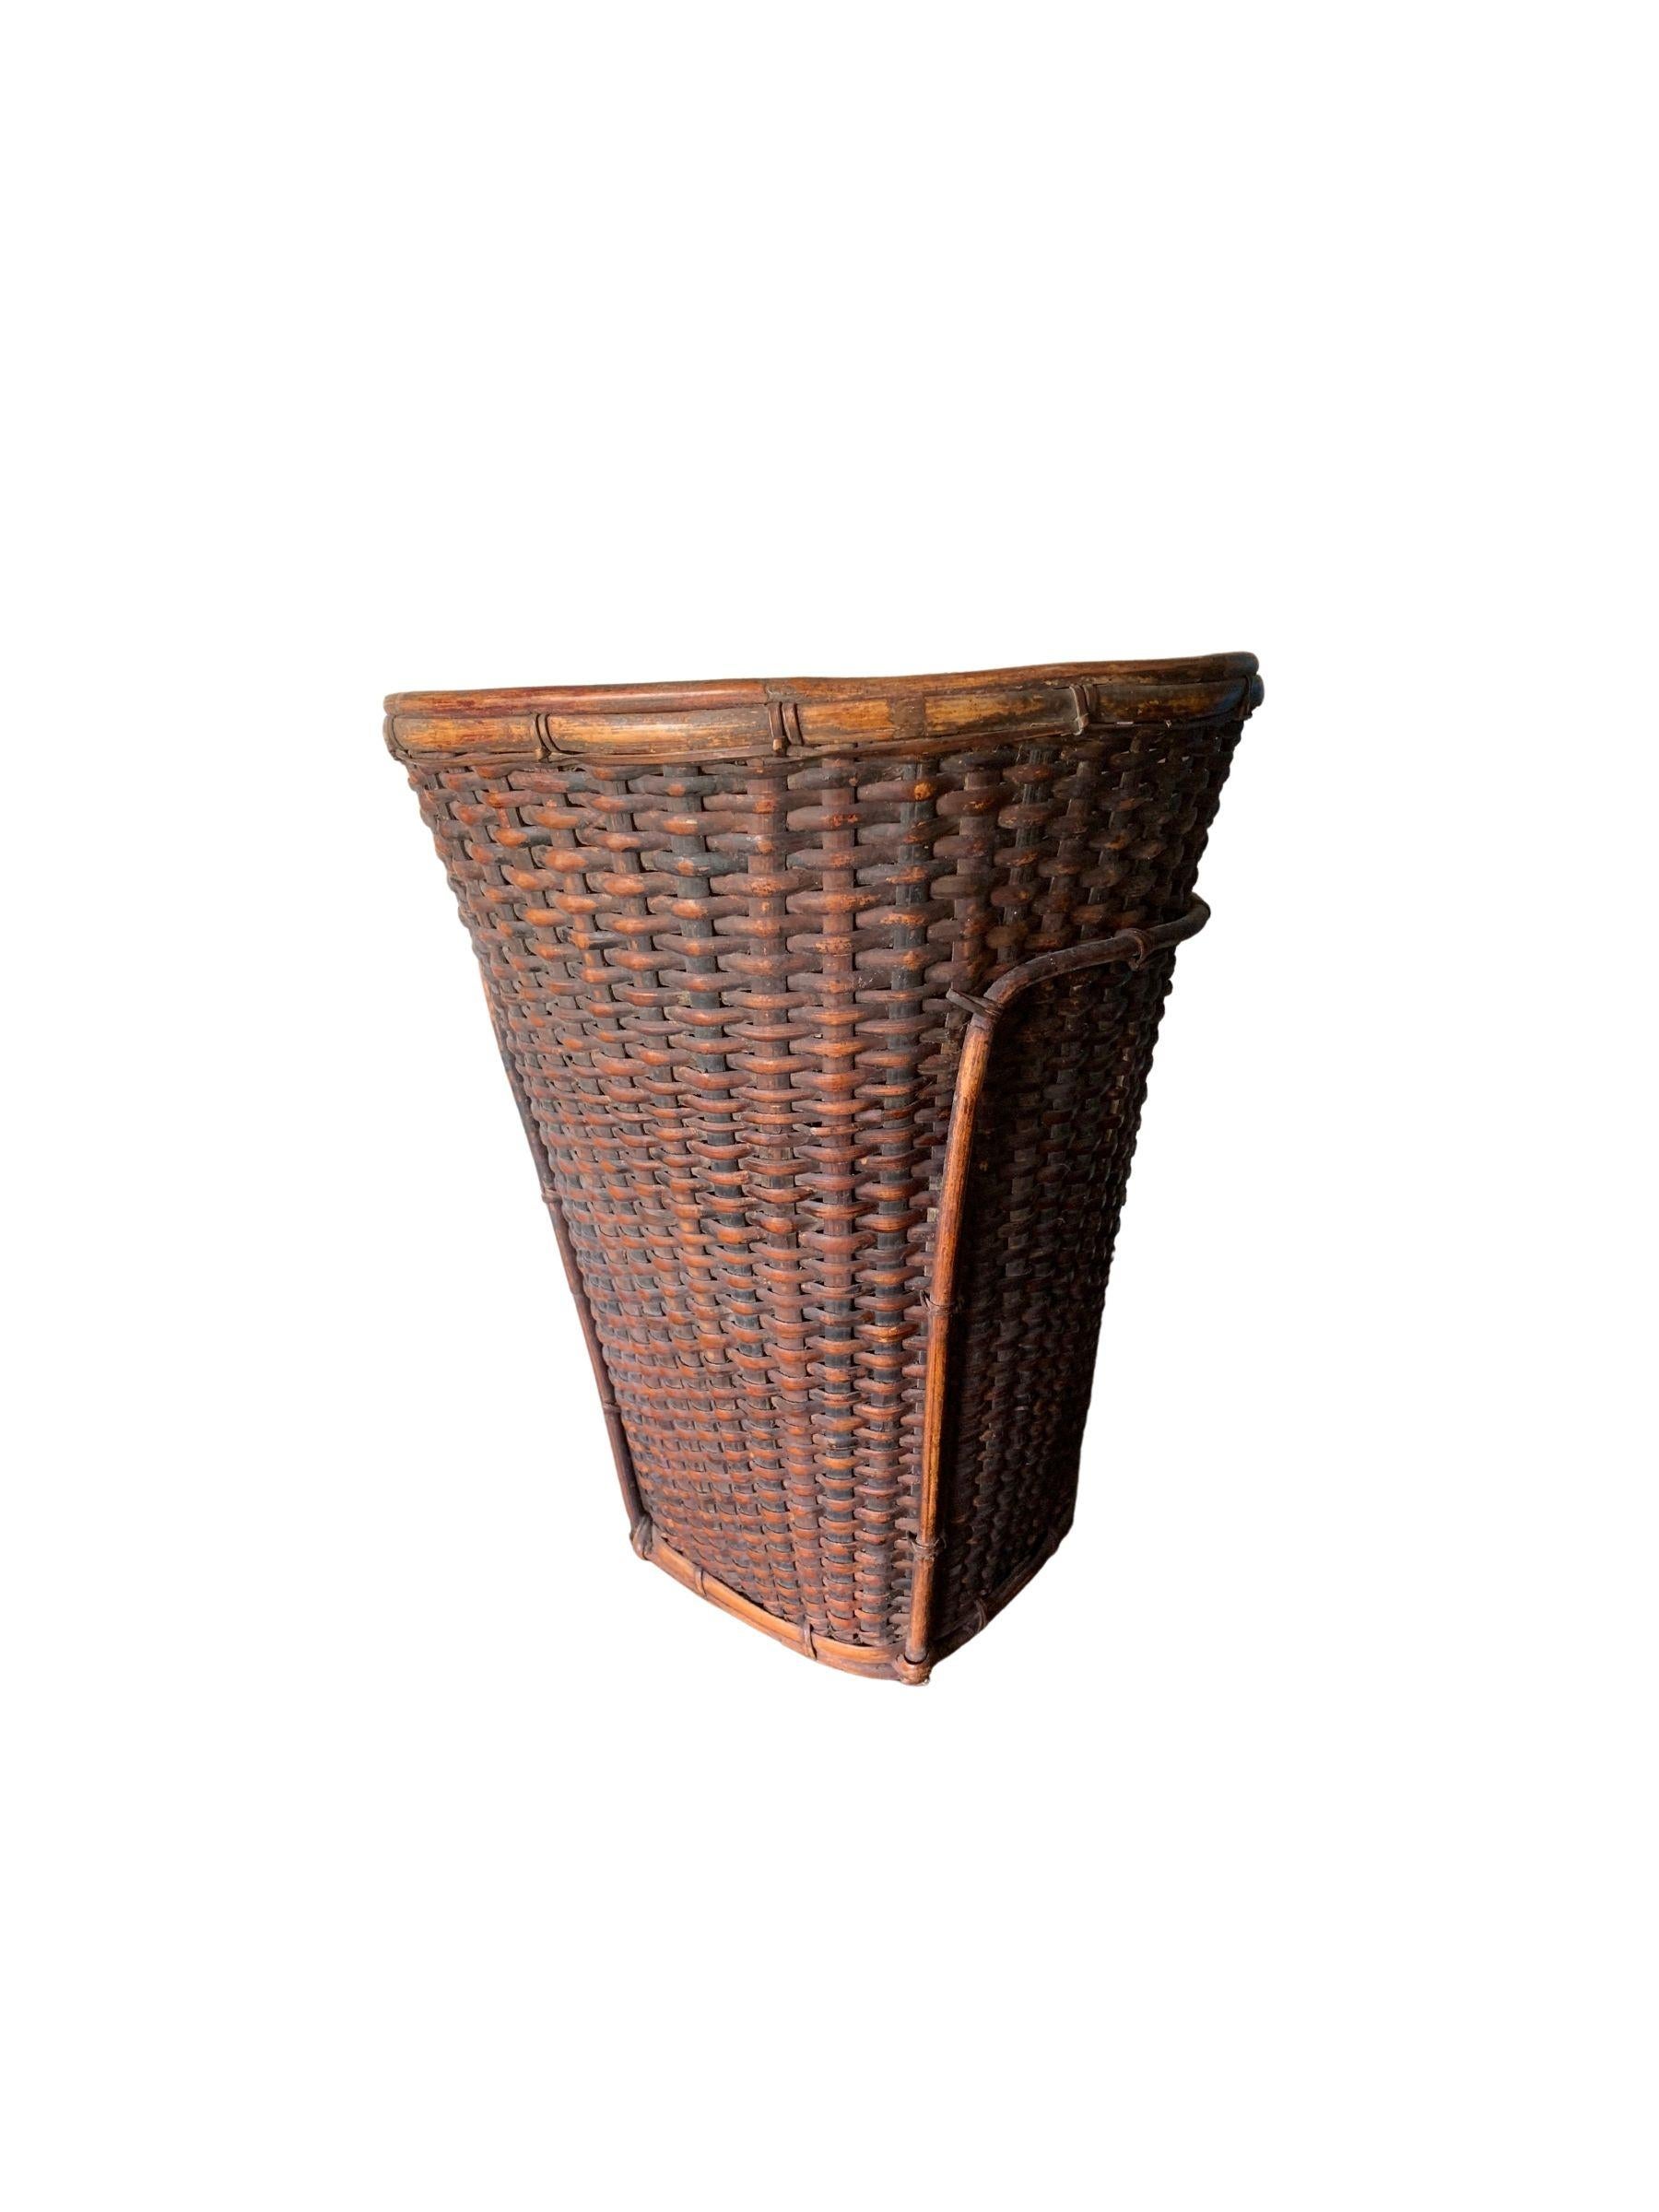 This mid-20th century hand-woven basket originates from the Dayak tribe of Borneo crafted with rattan fibres. These baskets were used to carry leaves, fruit, grain and wood and features wonderfully aged fibres and wood patina. The various weaving